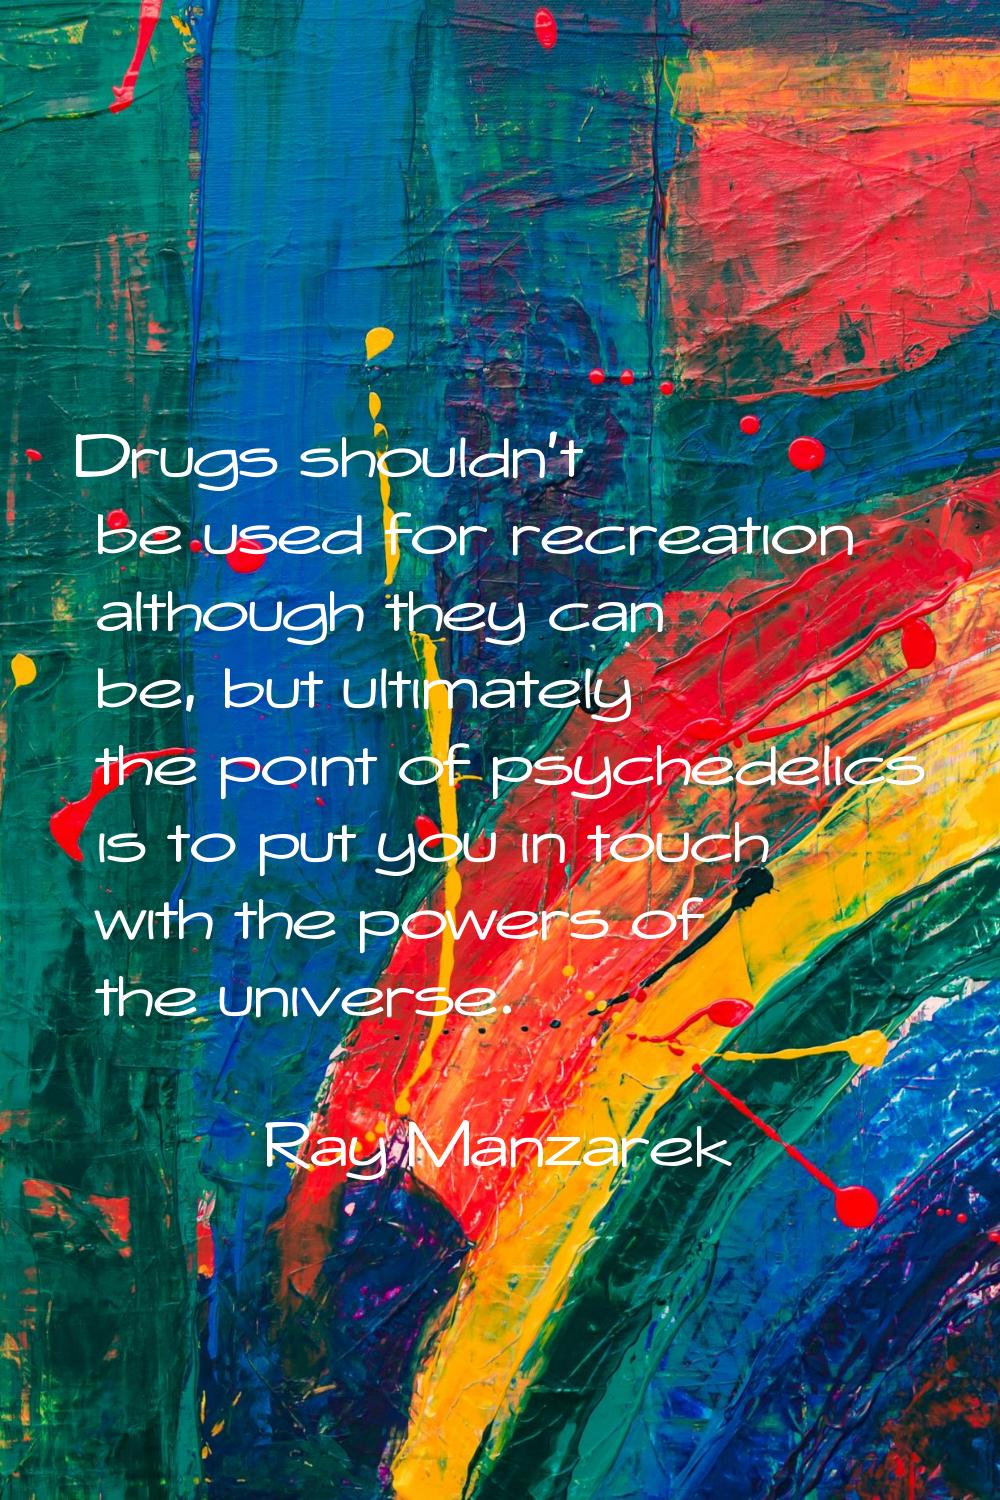 Drugs shouldn't be used for recreation although they can be, but ultimately the point of psychedeli